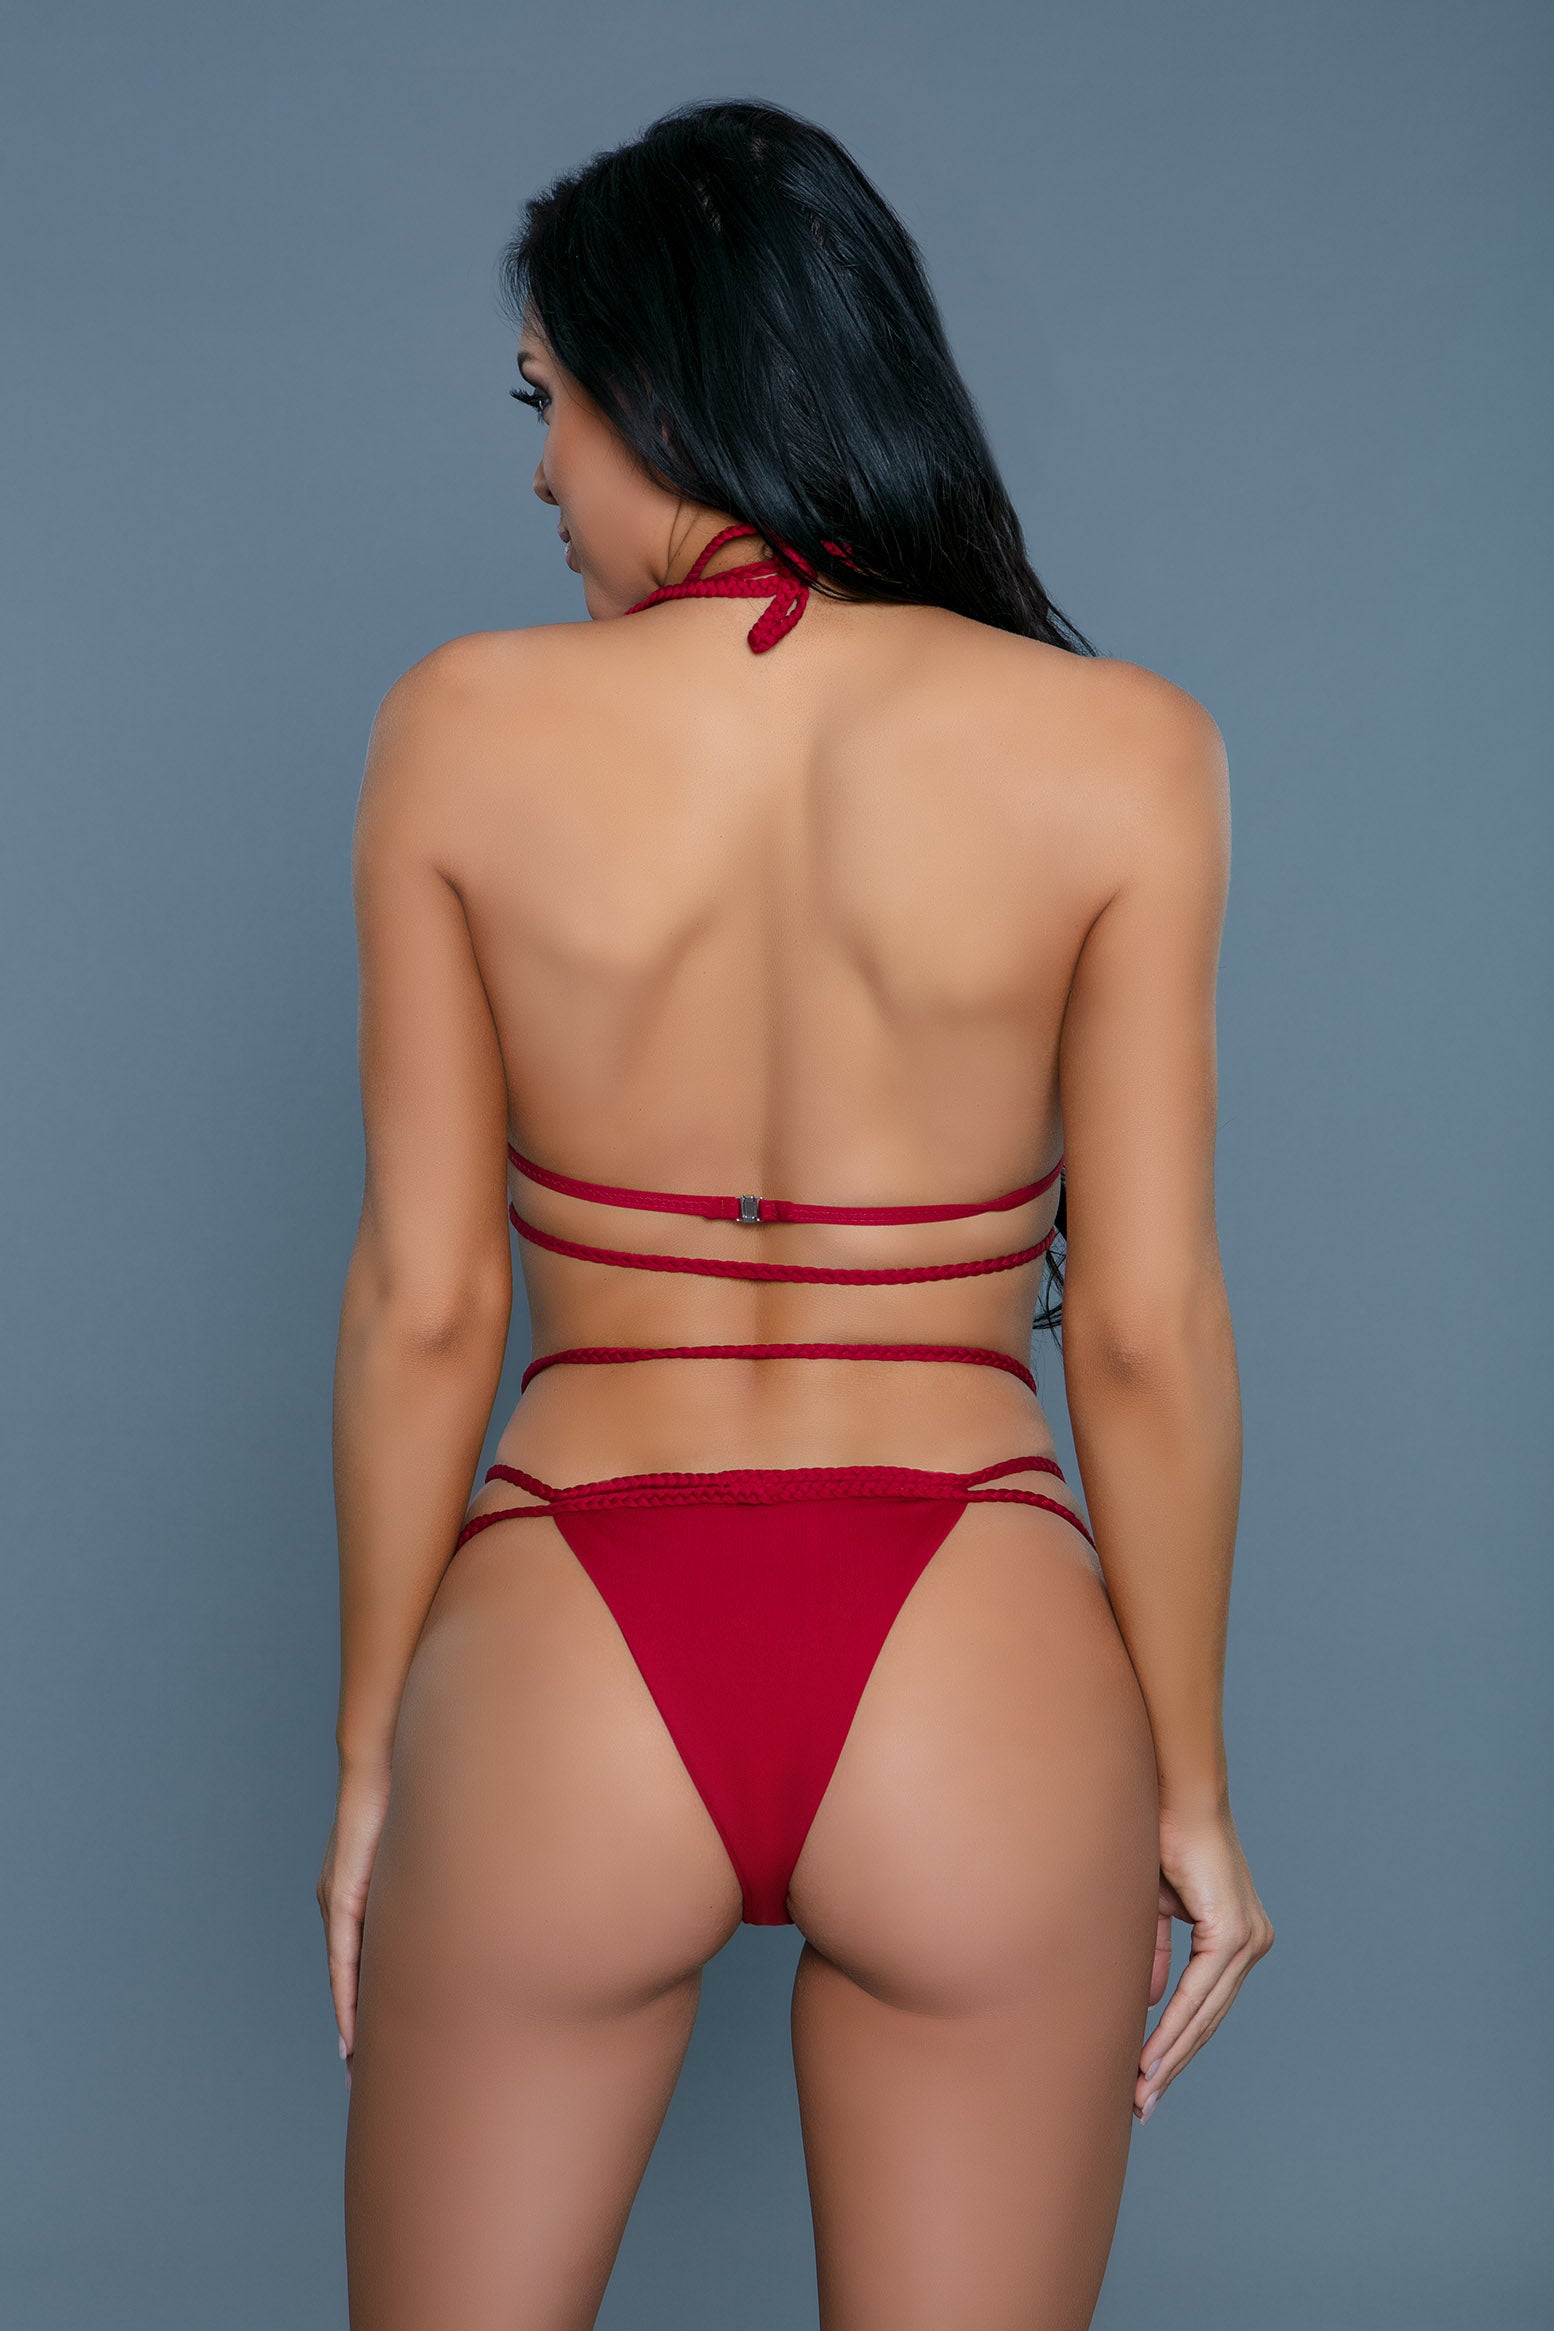 Artemesia Swimsuit by Be Wicked in Black or Red in Size S, M, L or XL